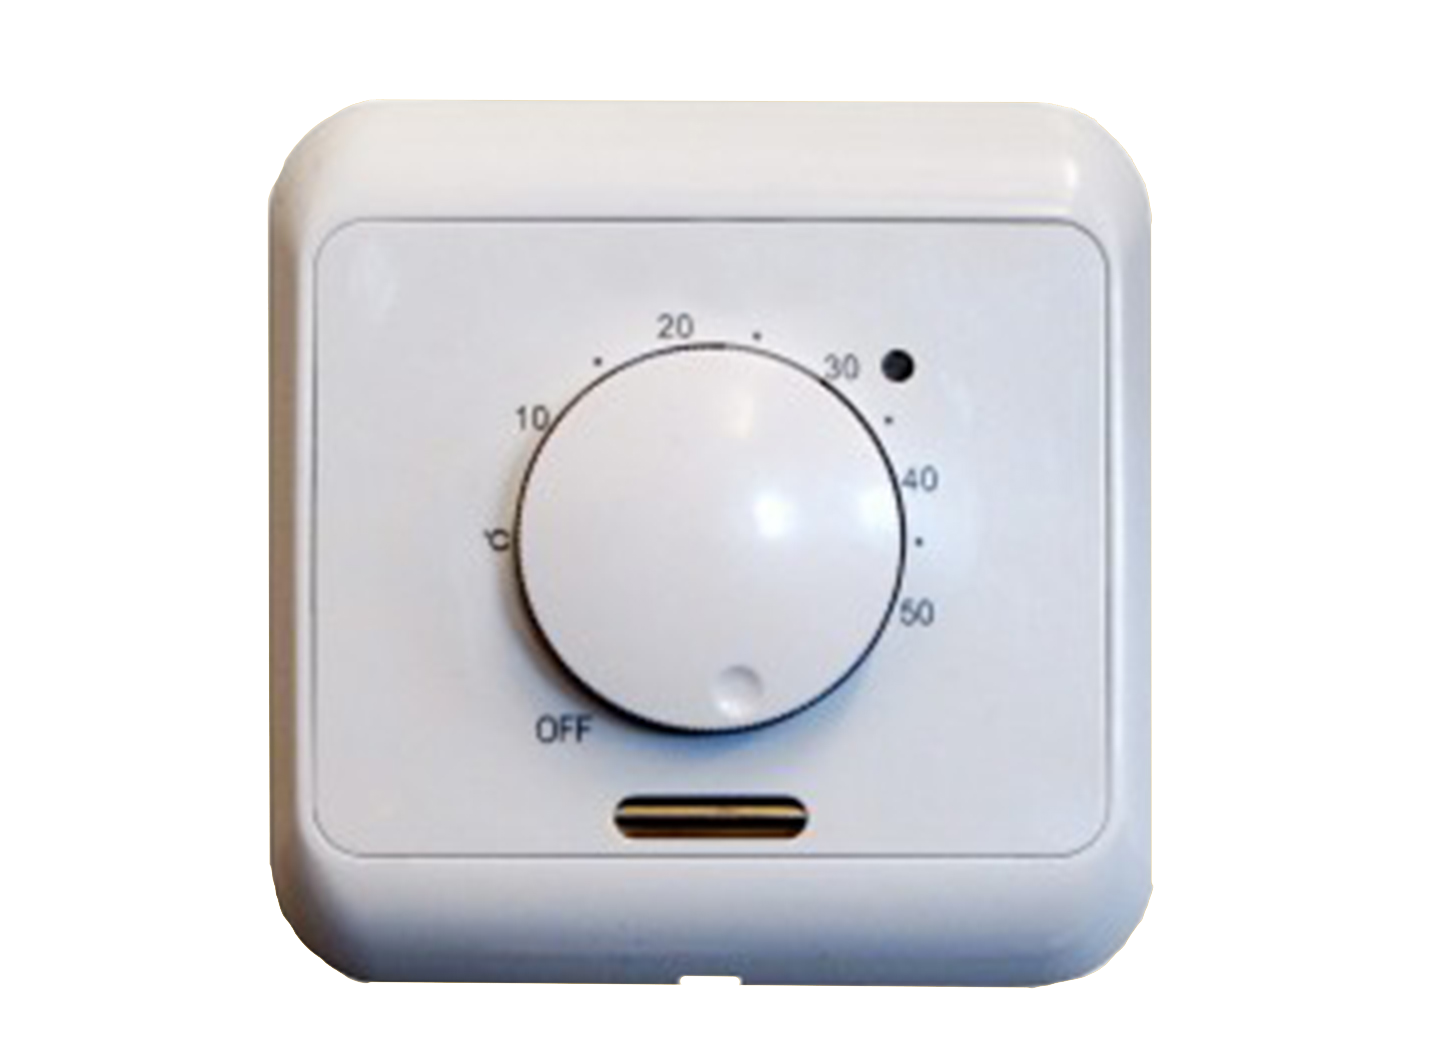 https://www.wundatrade.co.uk/wp-content/uploads/2014/07/electronic-room-thermostat.png